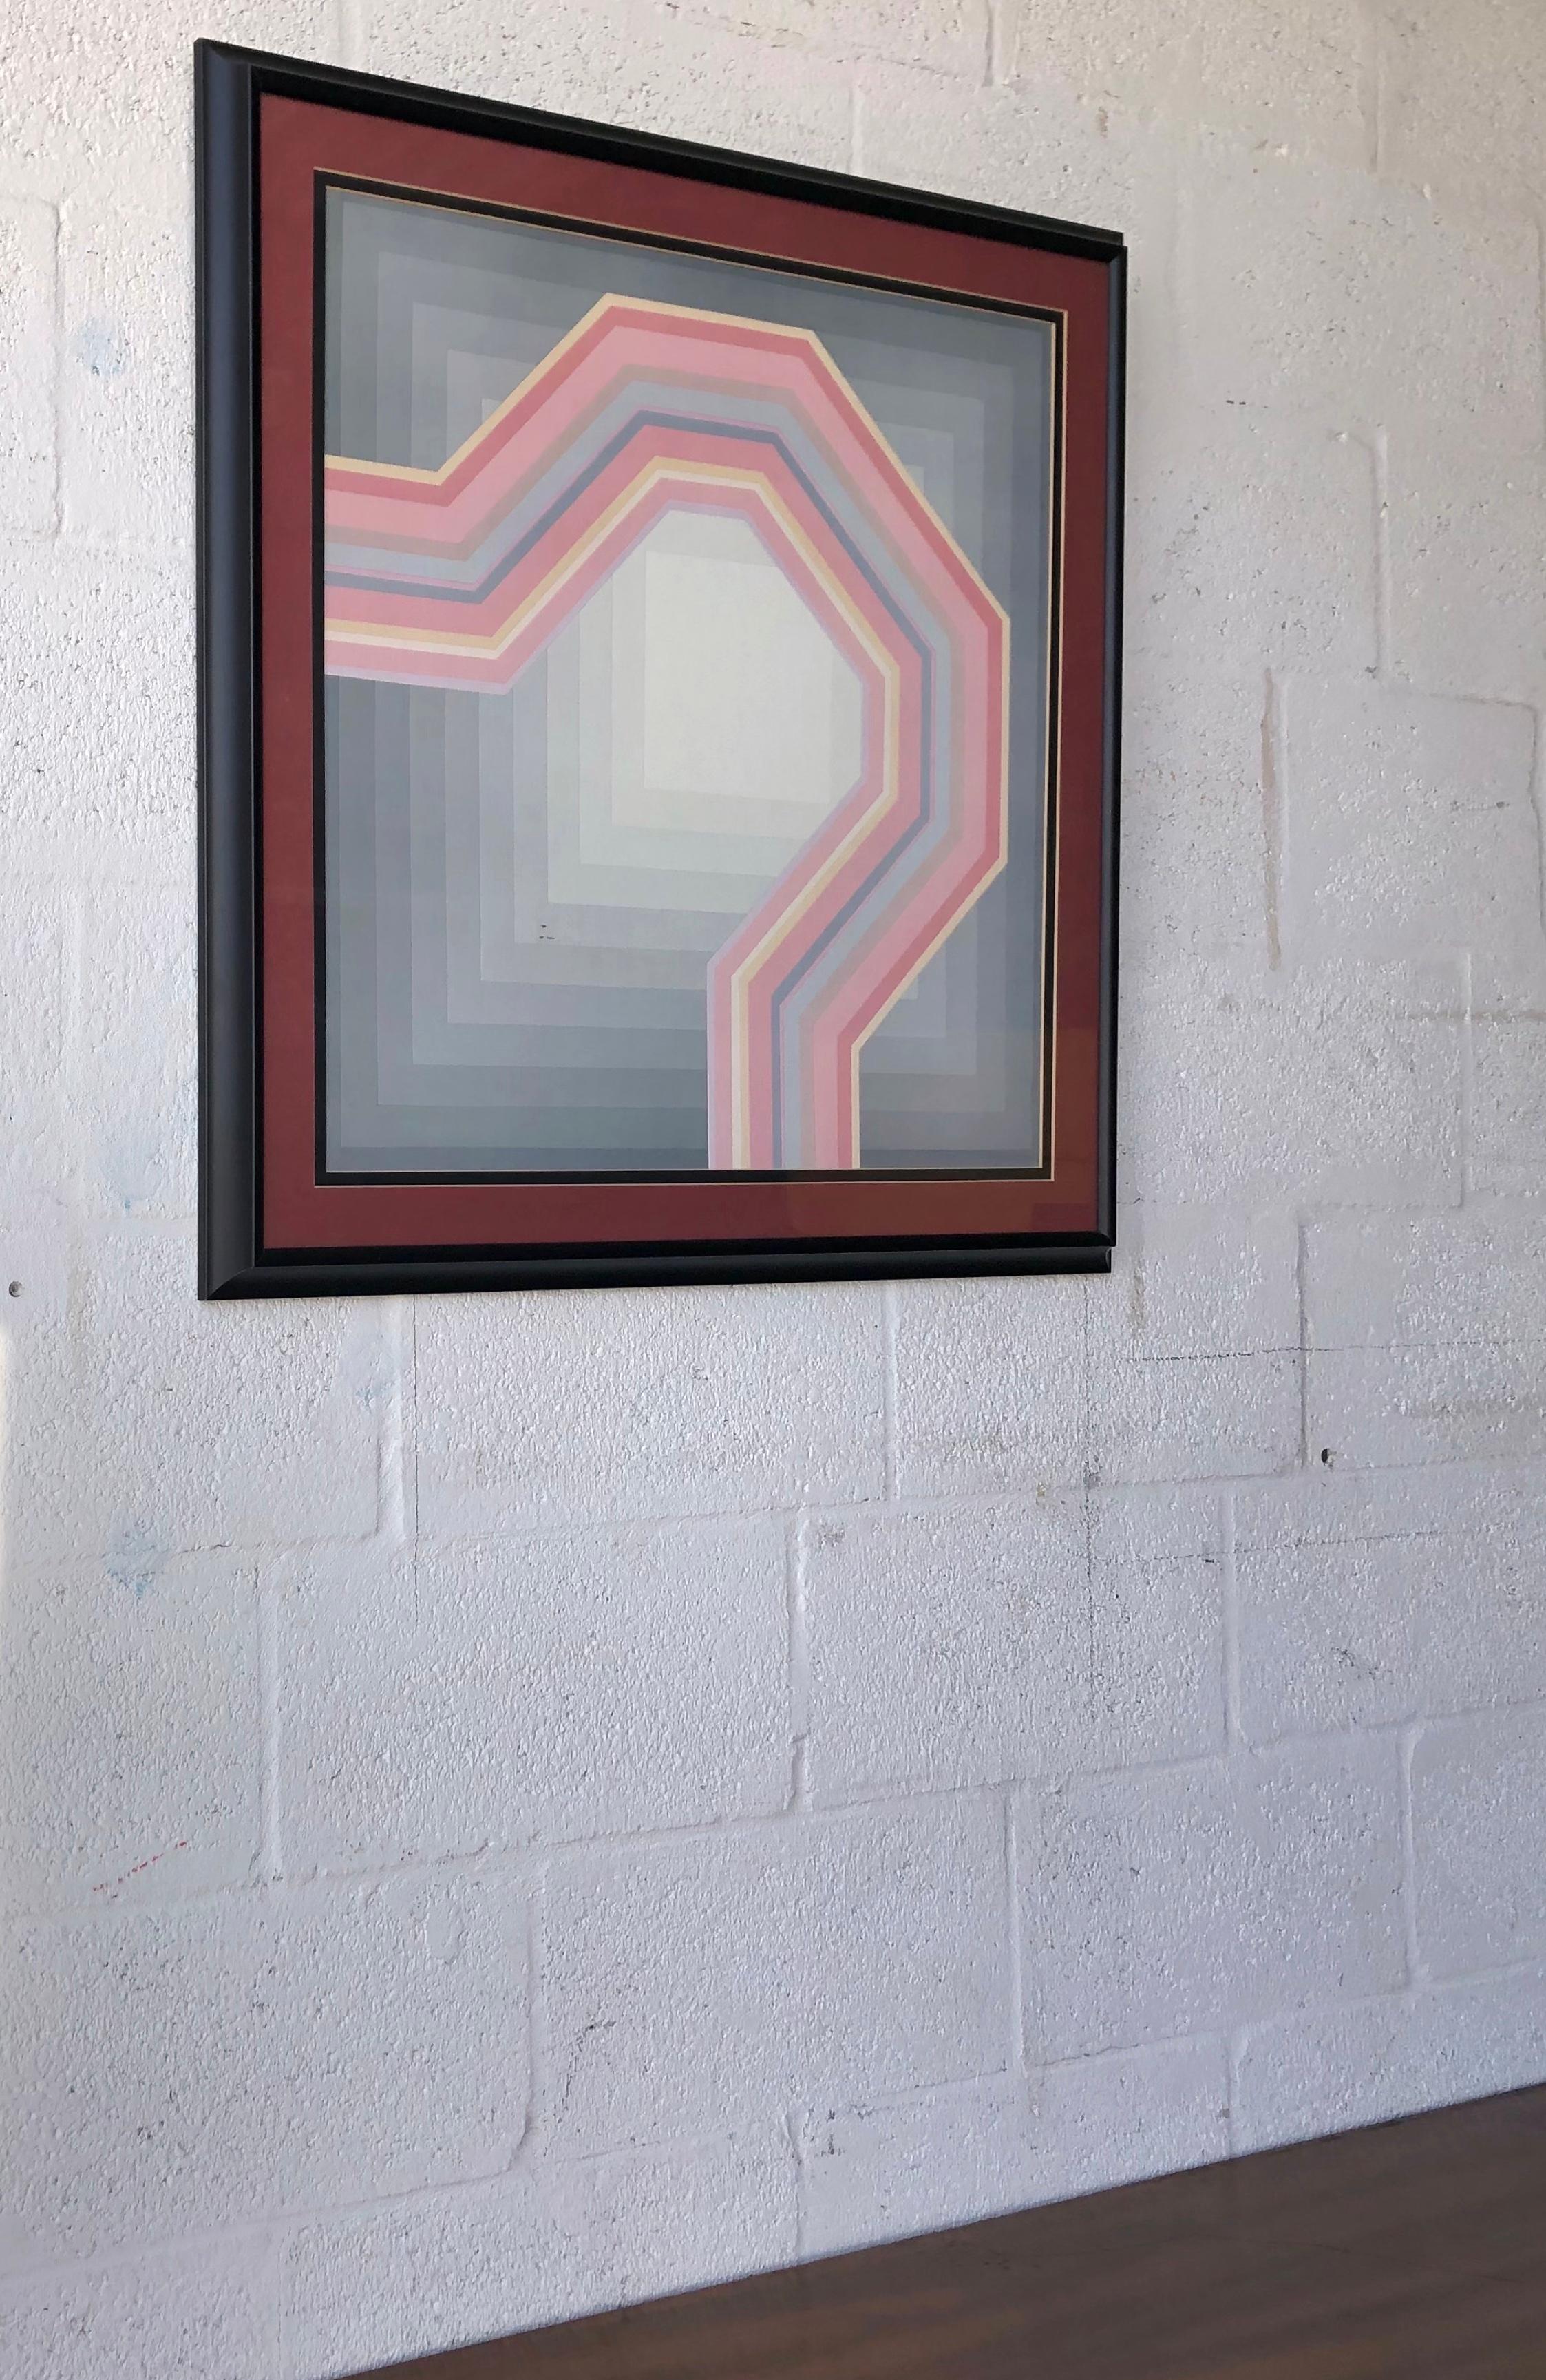 Framed Geometric Op Art Lithograph in the Richard Anuszkiewicz's Style. C 1980s In Good Condition For Sale In Miami, FL